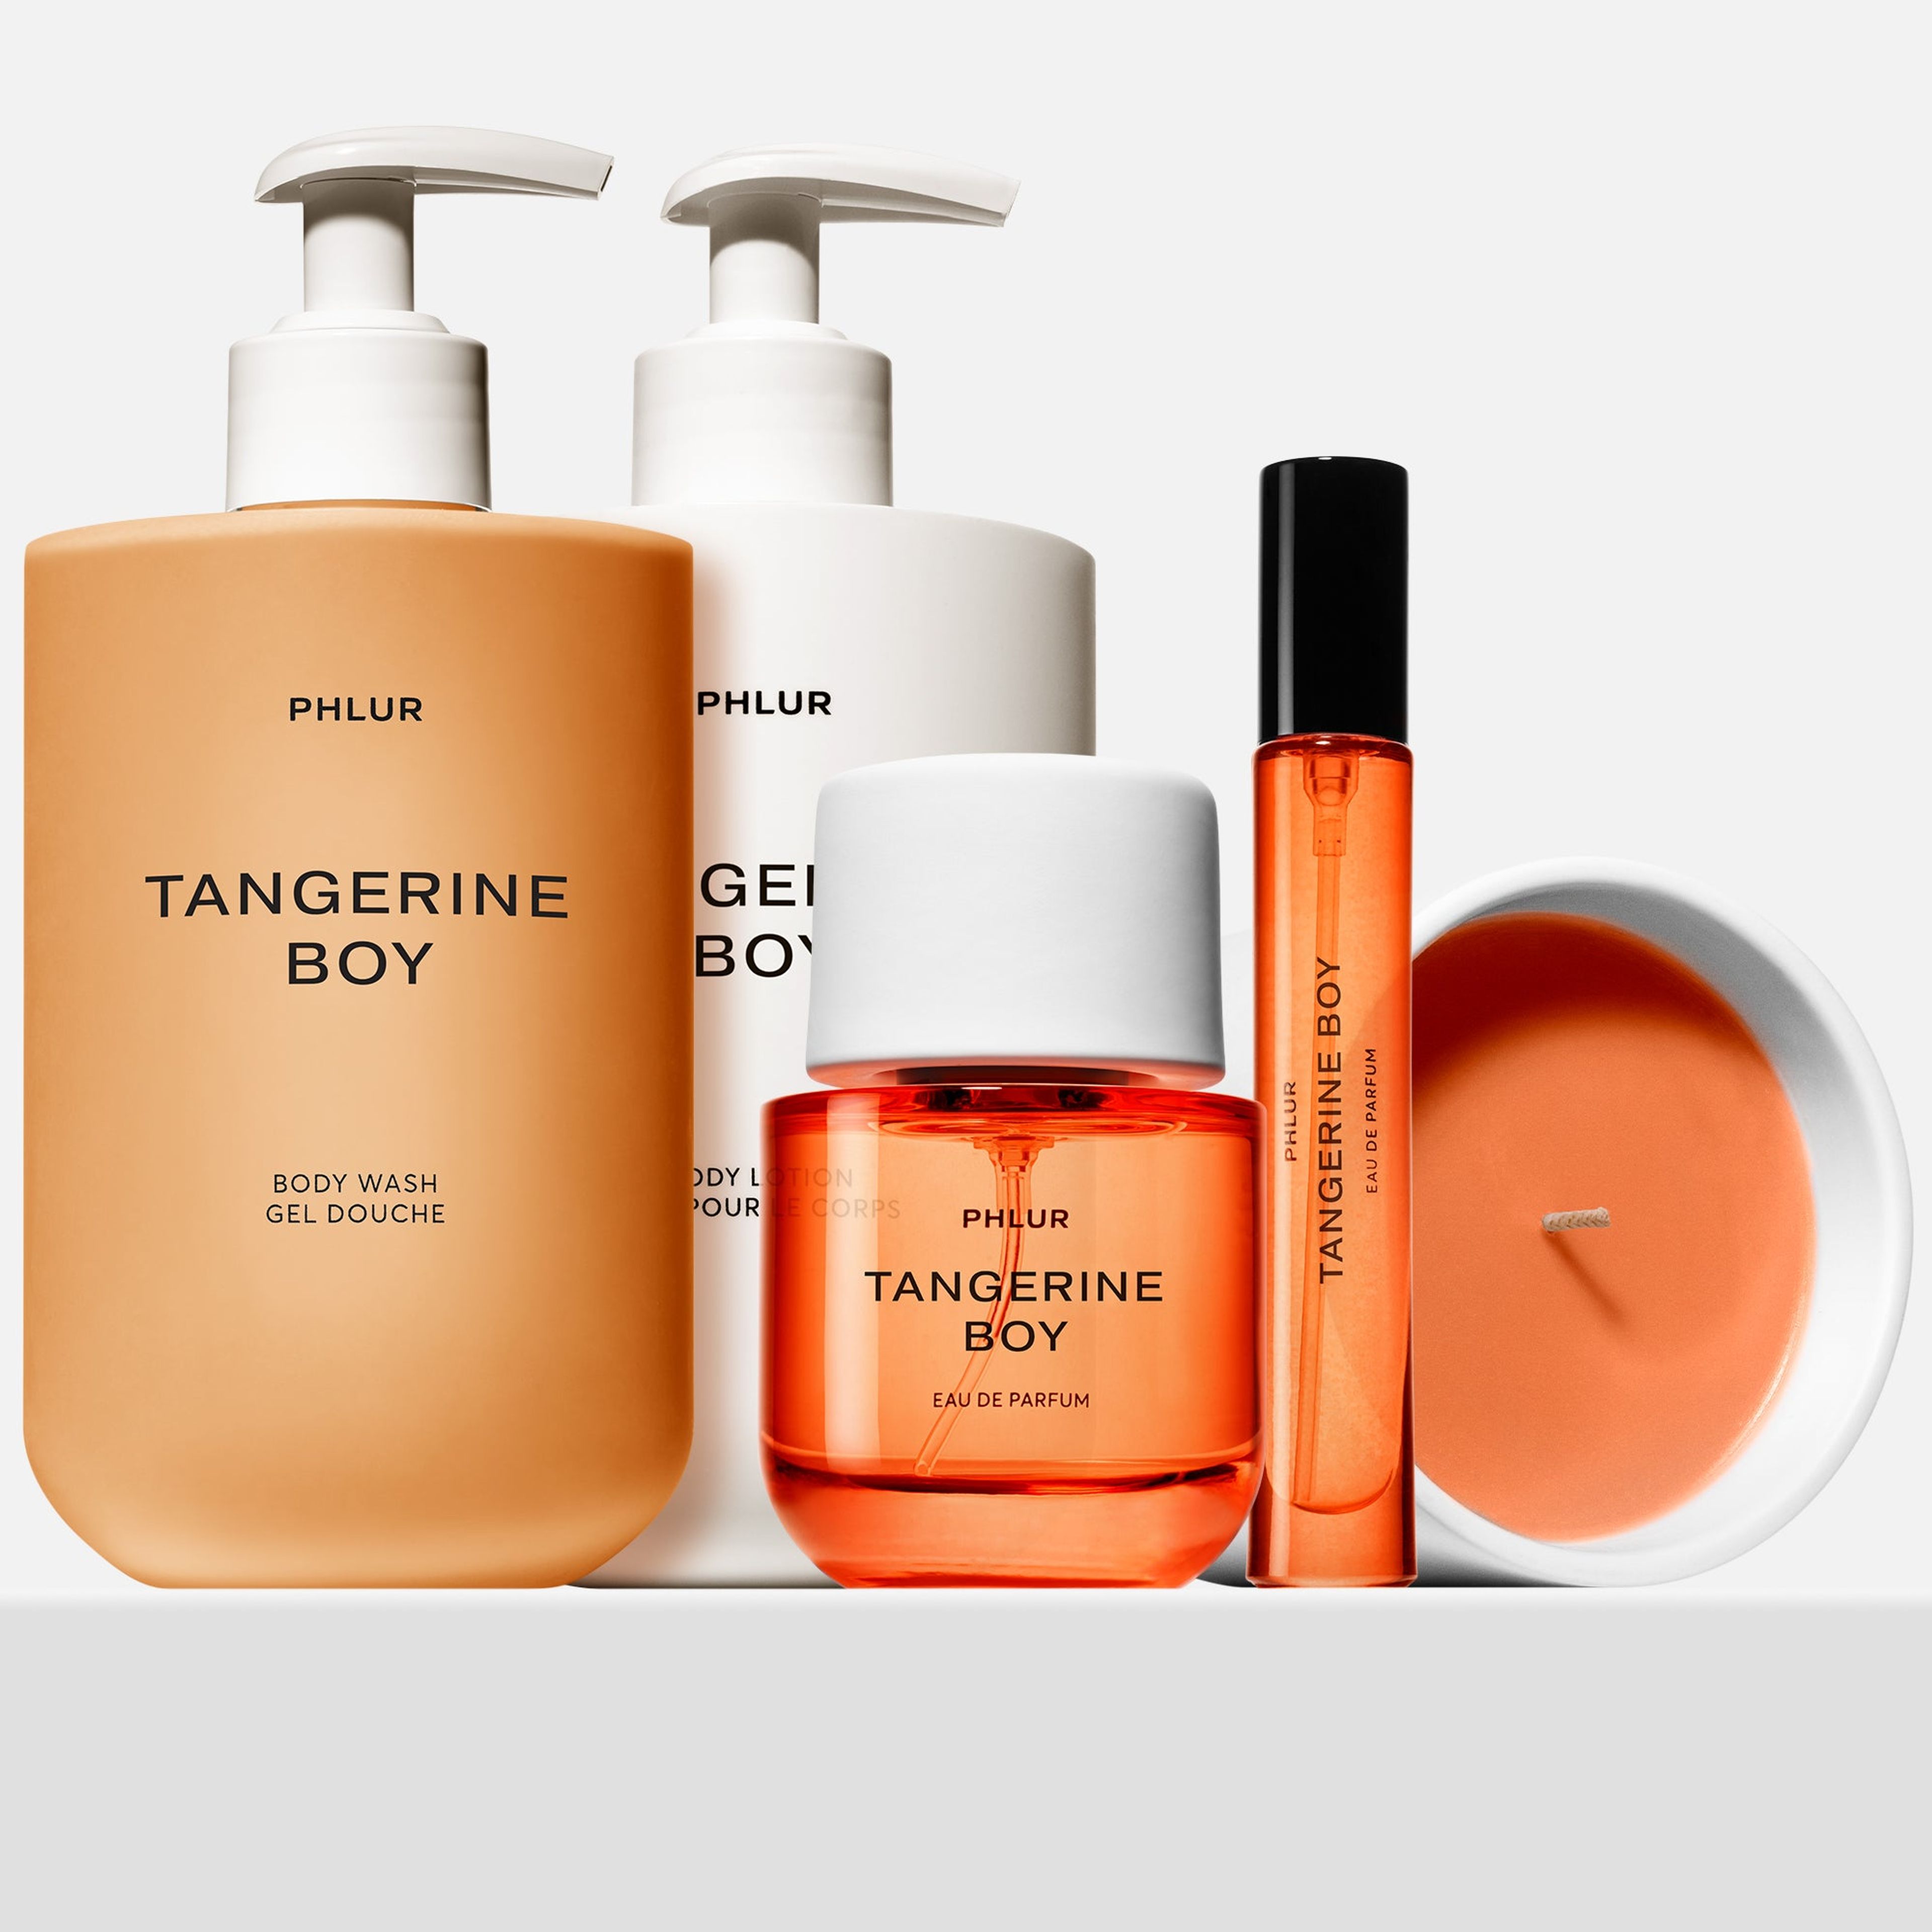 The Tangerine Boy Collection